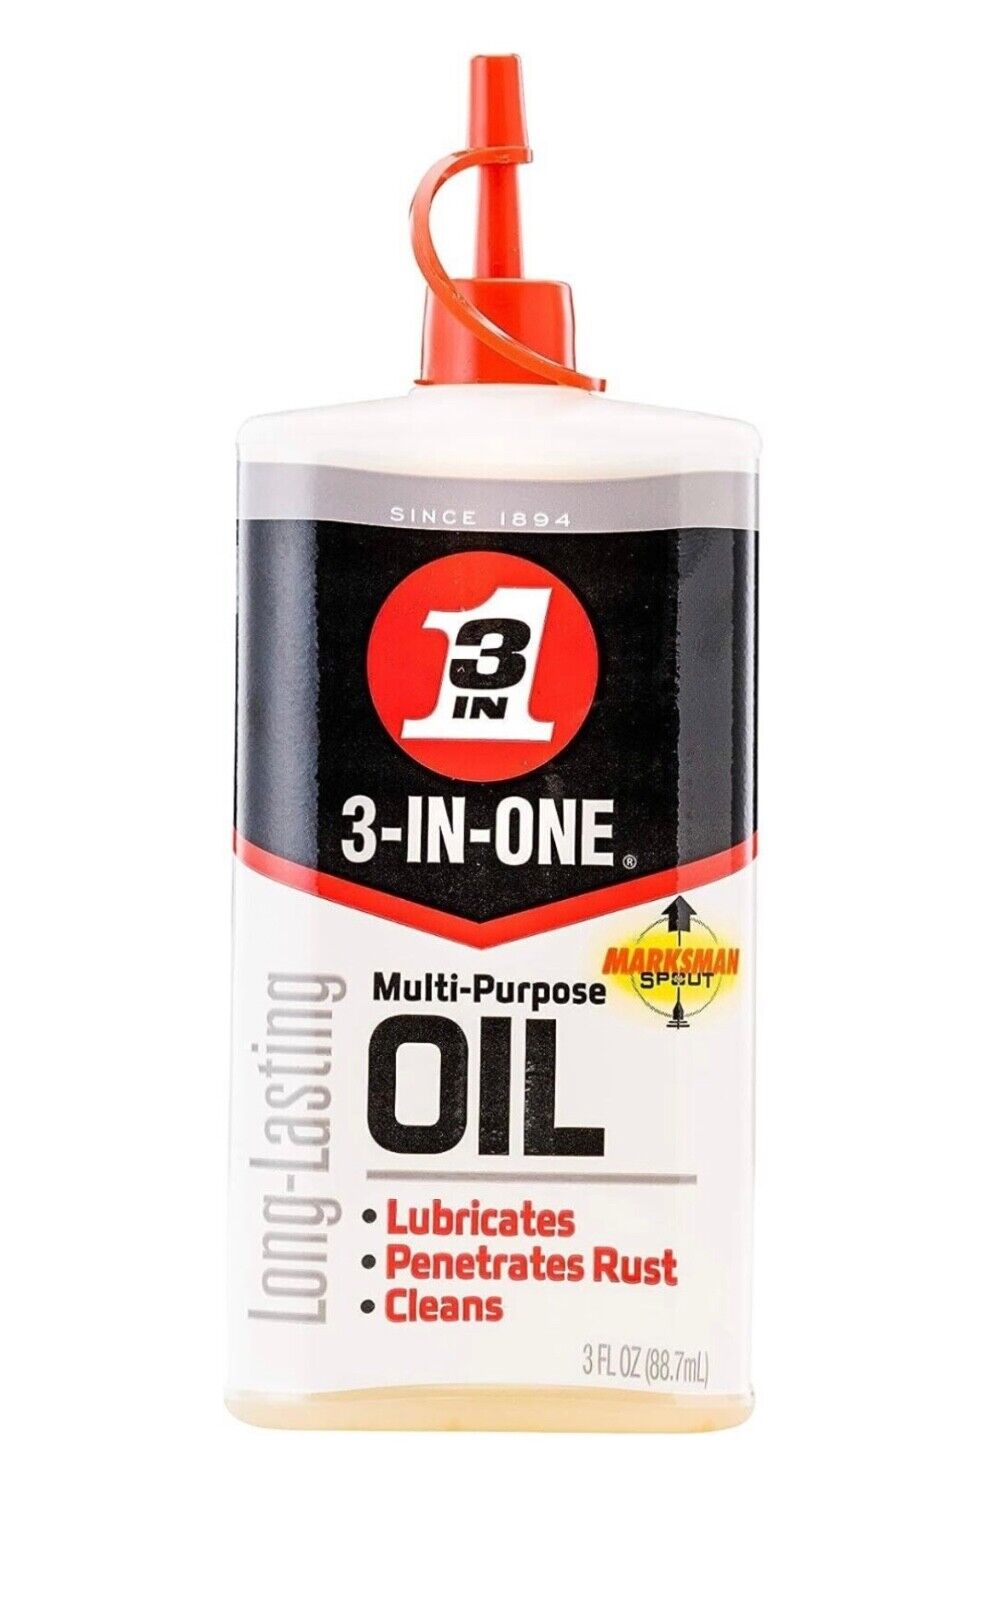 3-IN-ONE Multi-Purpose Oil - Trusted Tool, Precise Application - 3 OZ, 1-pack